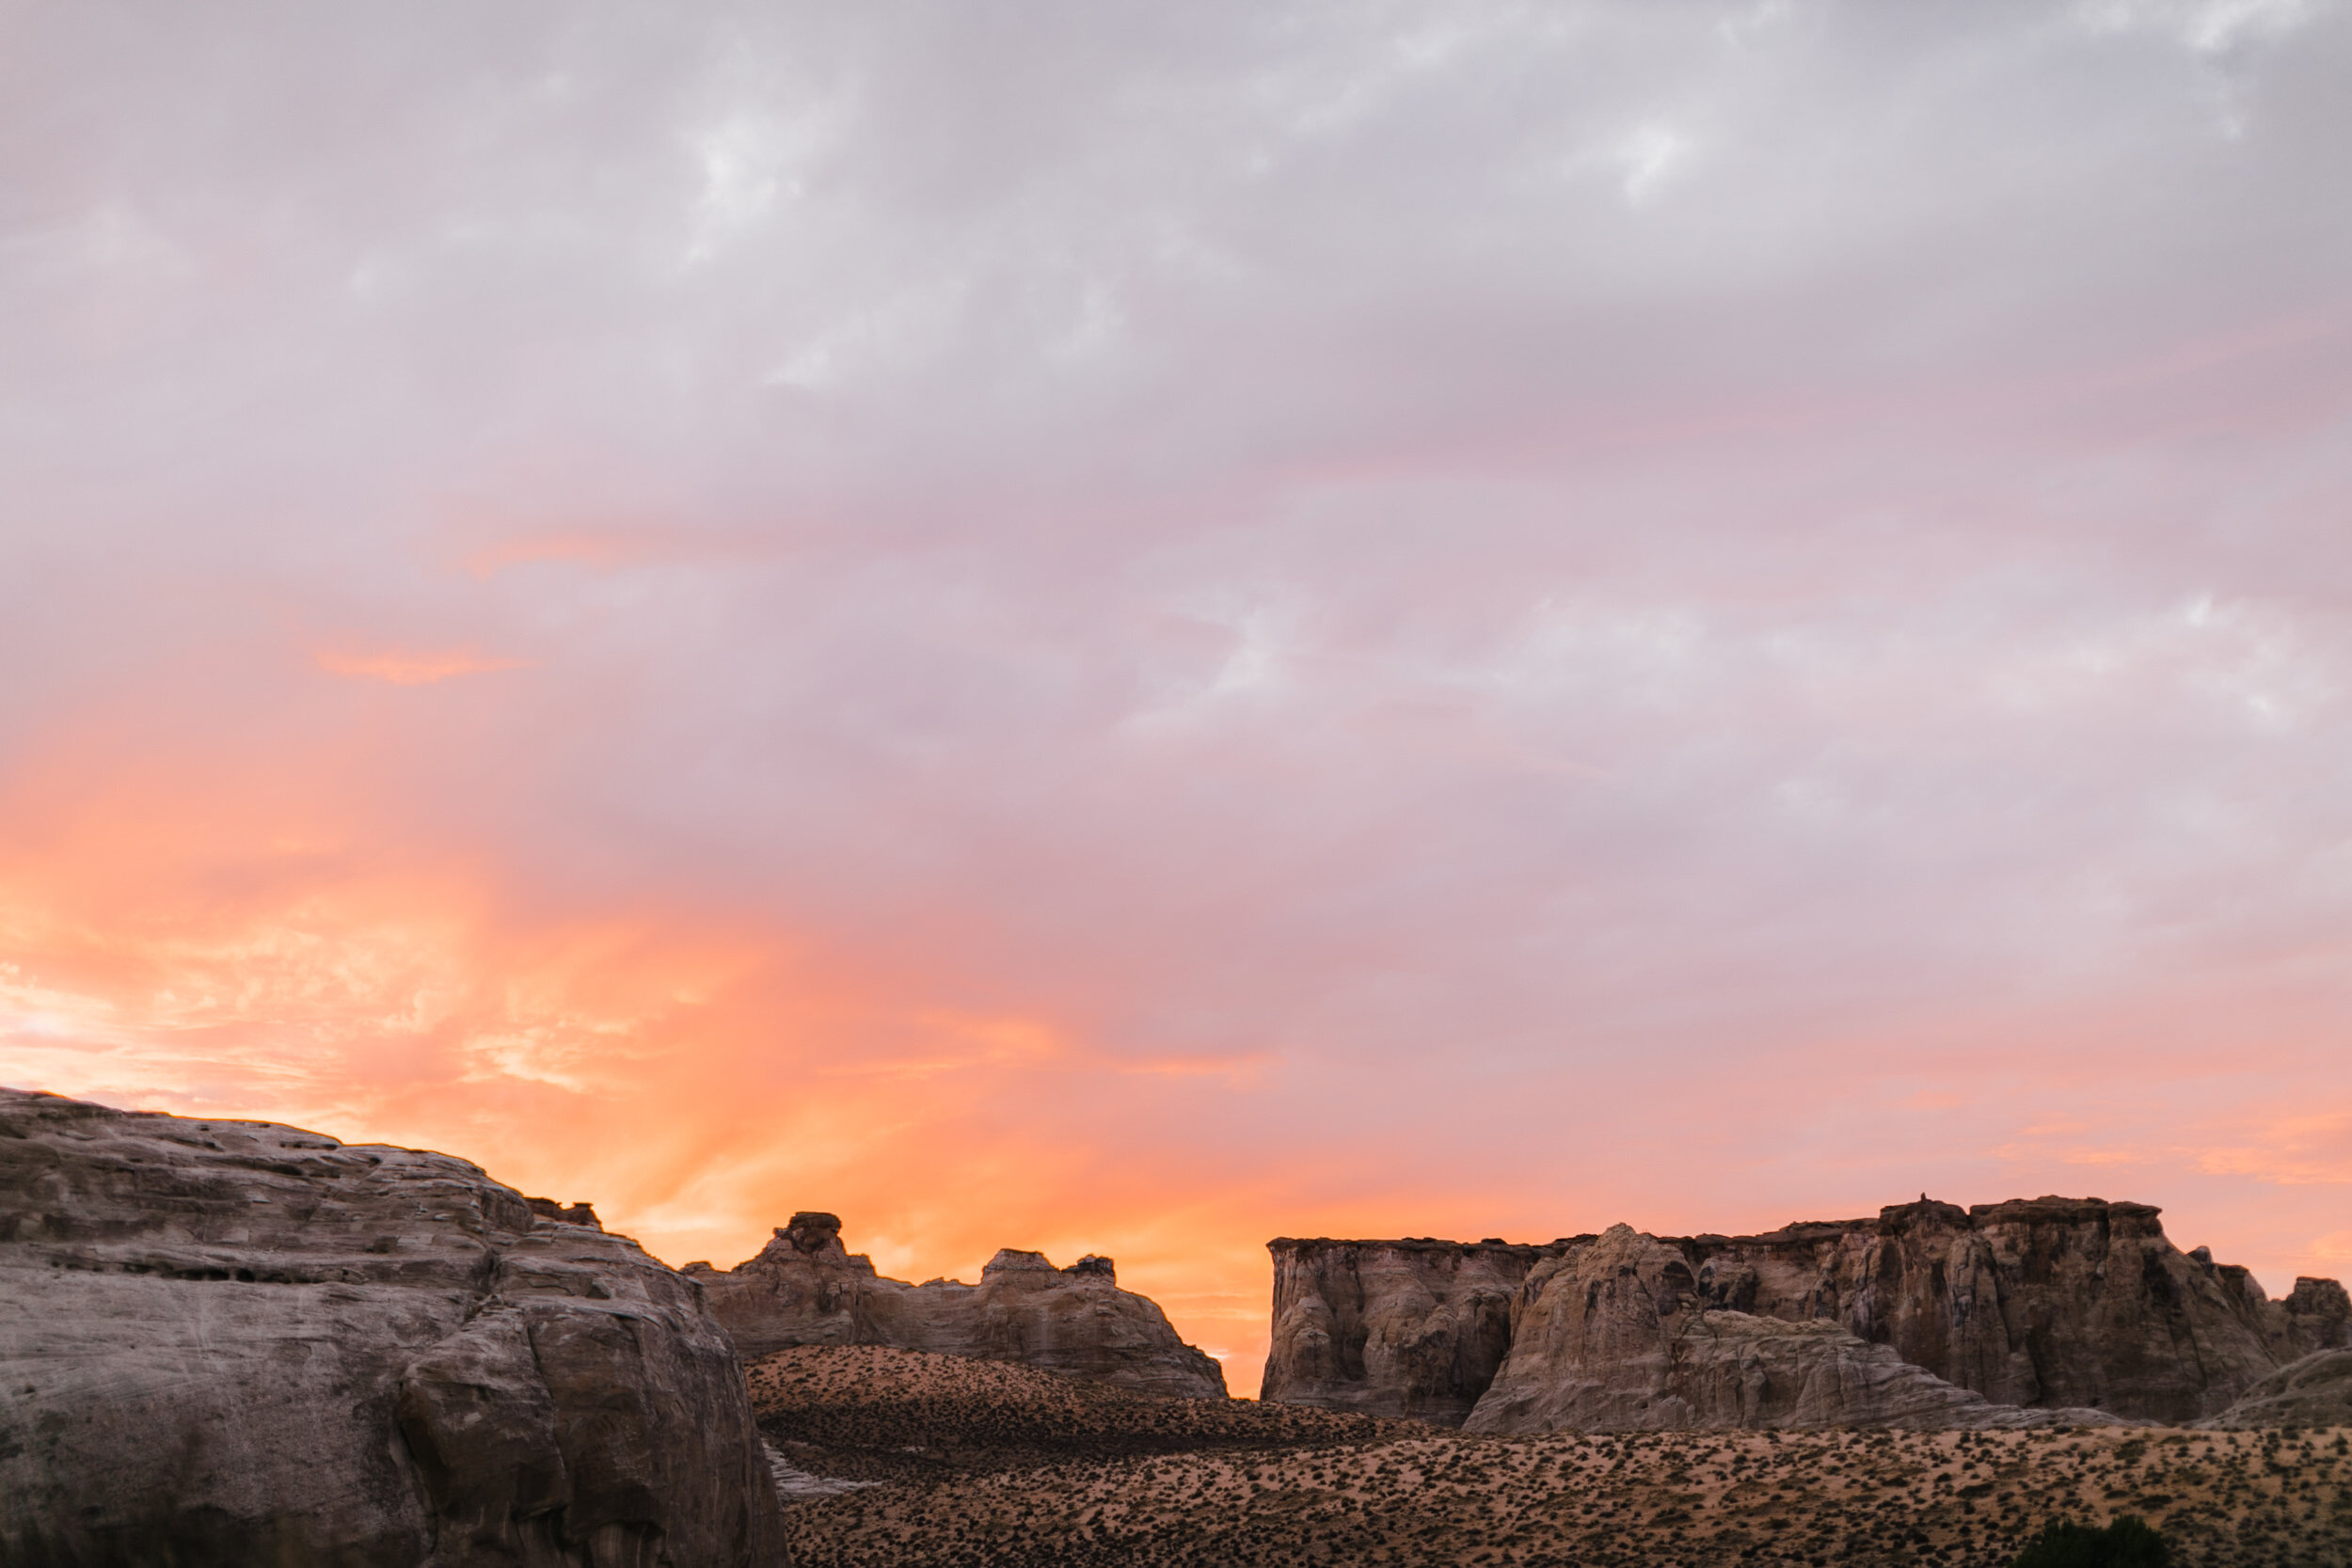 Adventure elopement photography at amangiri | The Hearnes